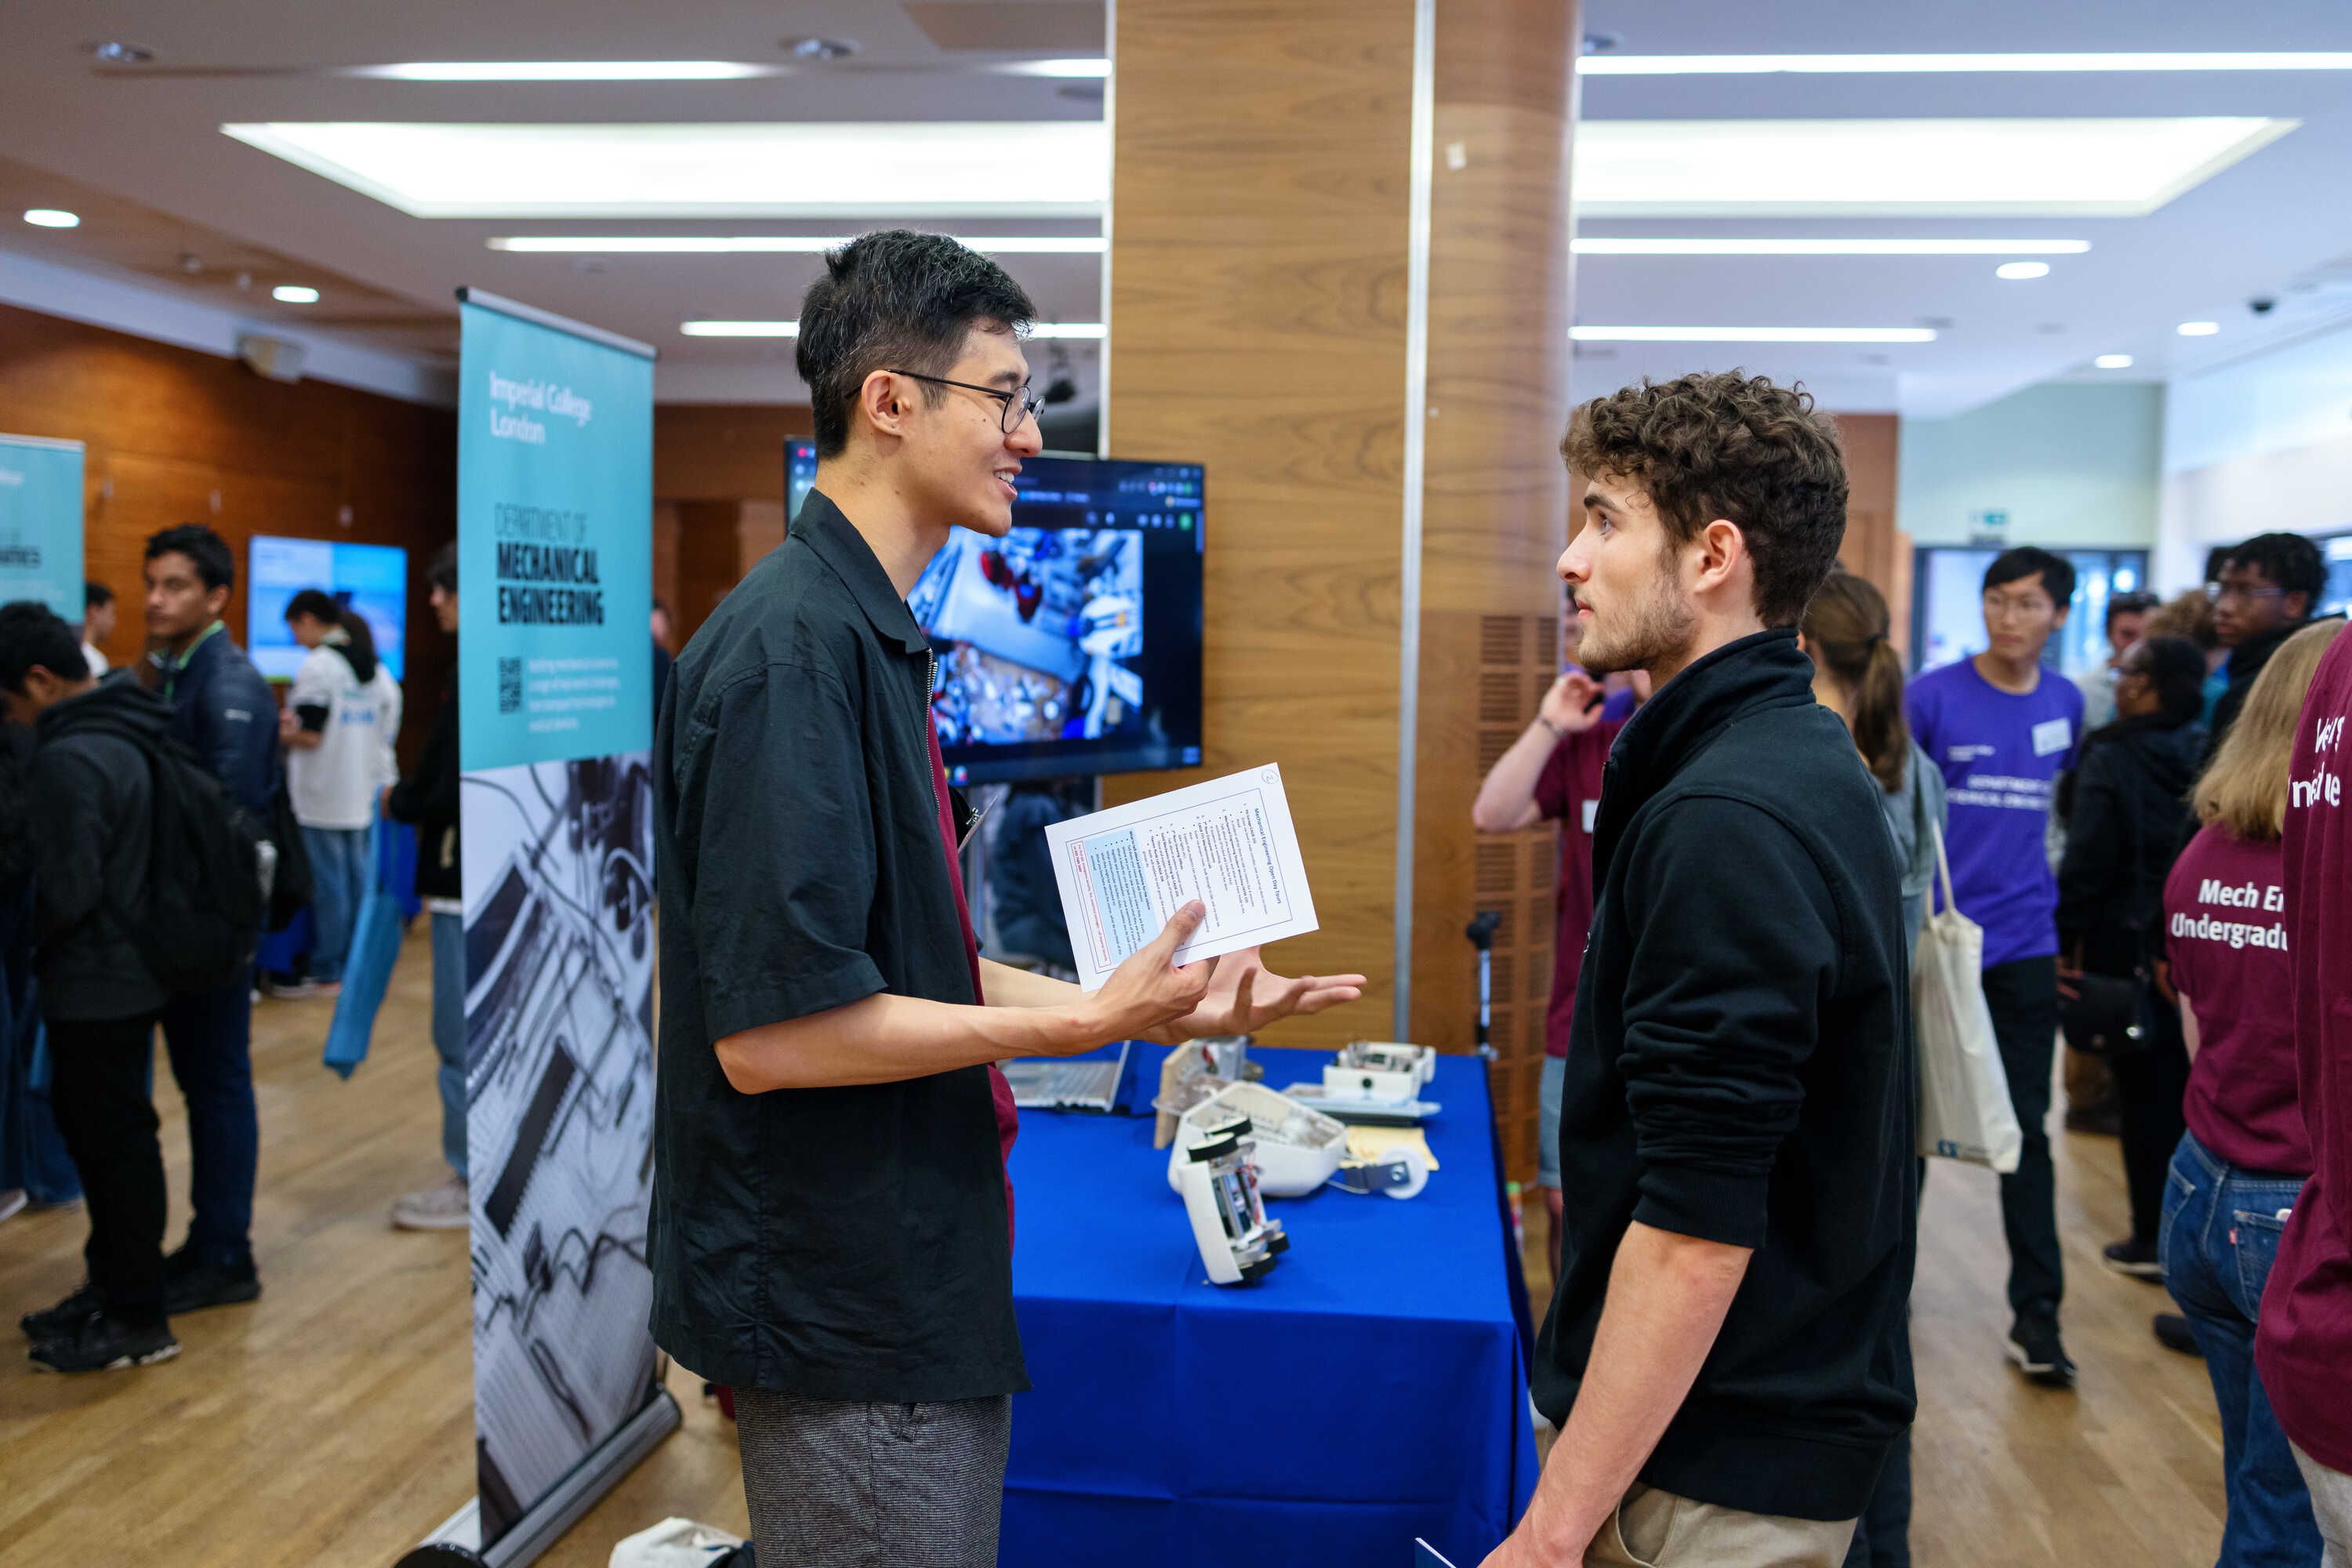 Two students talking at an event at Imperial's South Kensington Campus